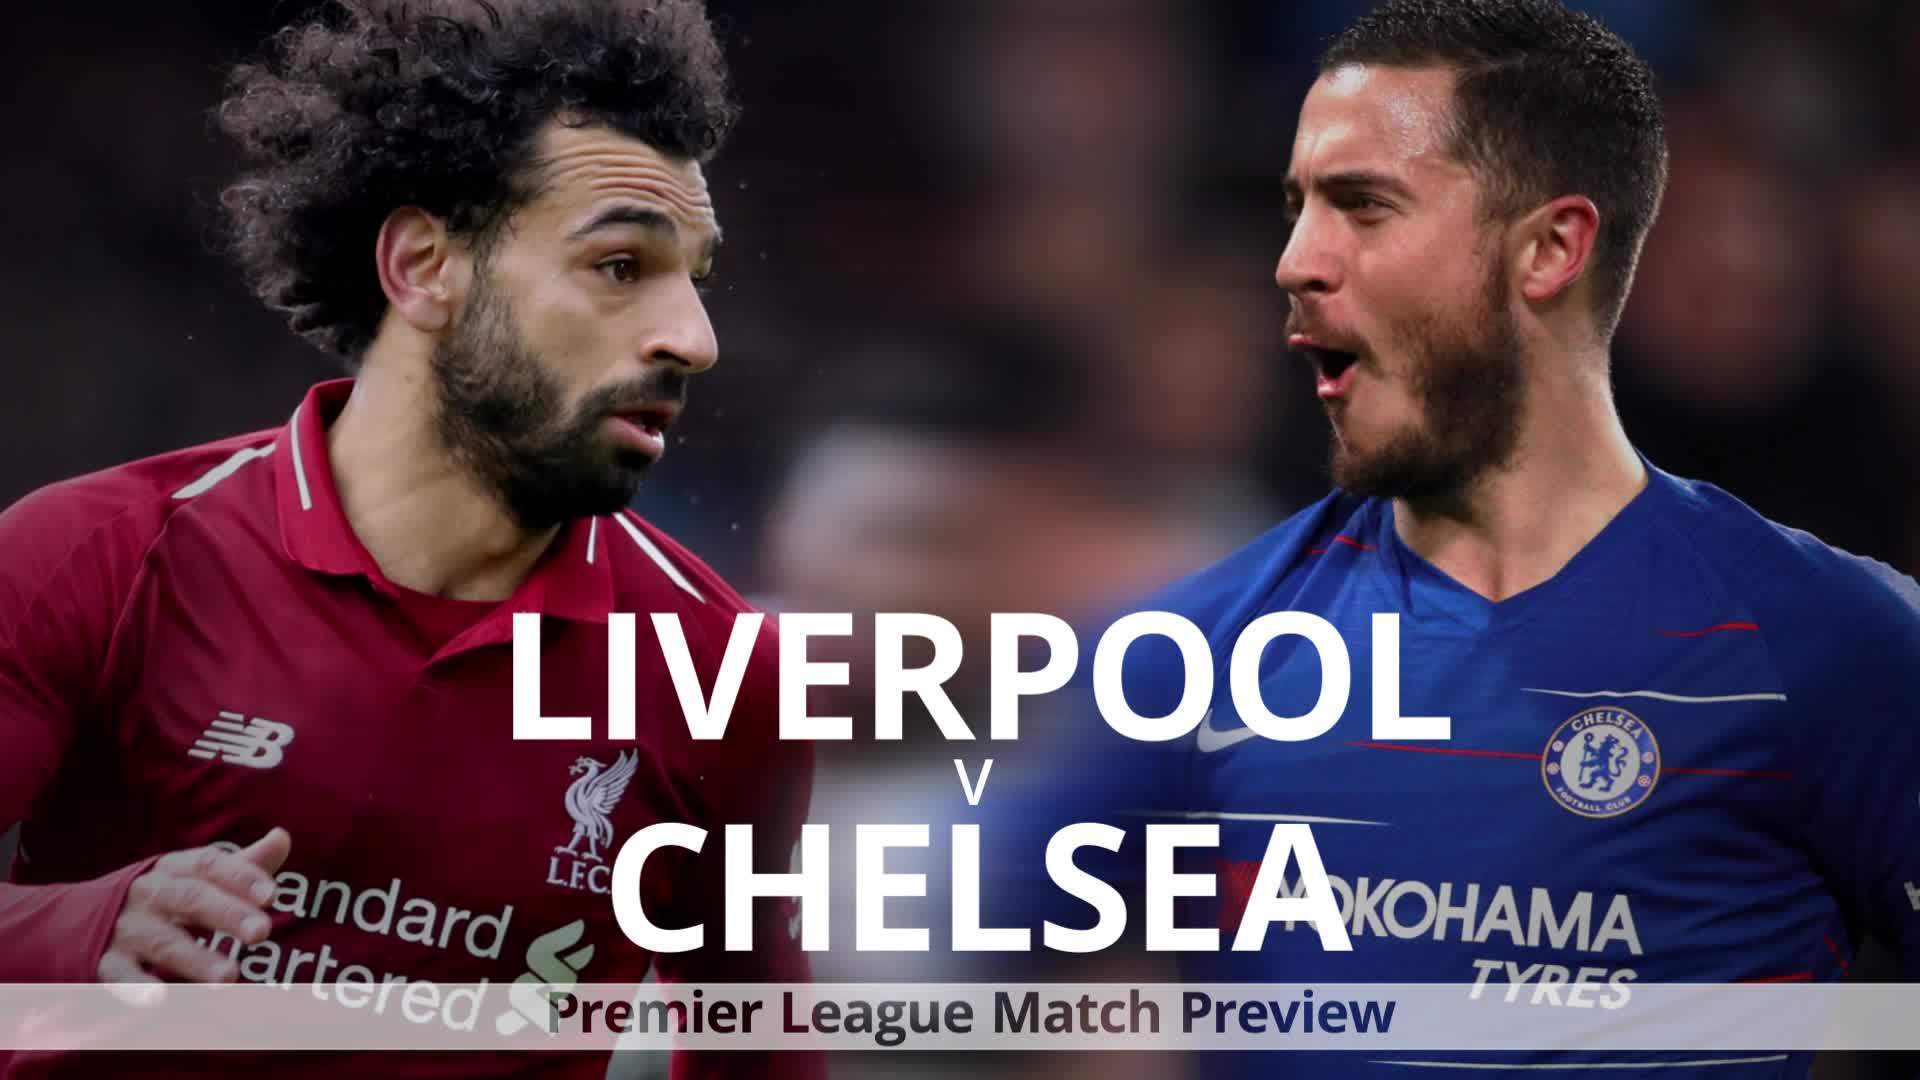 Liverpool Vs Chelsea Premier League Match Preview And Bet Tips